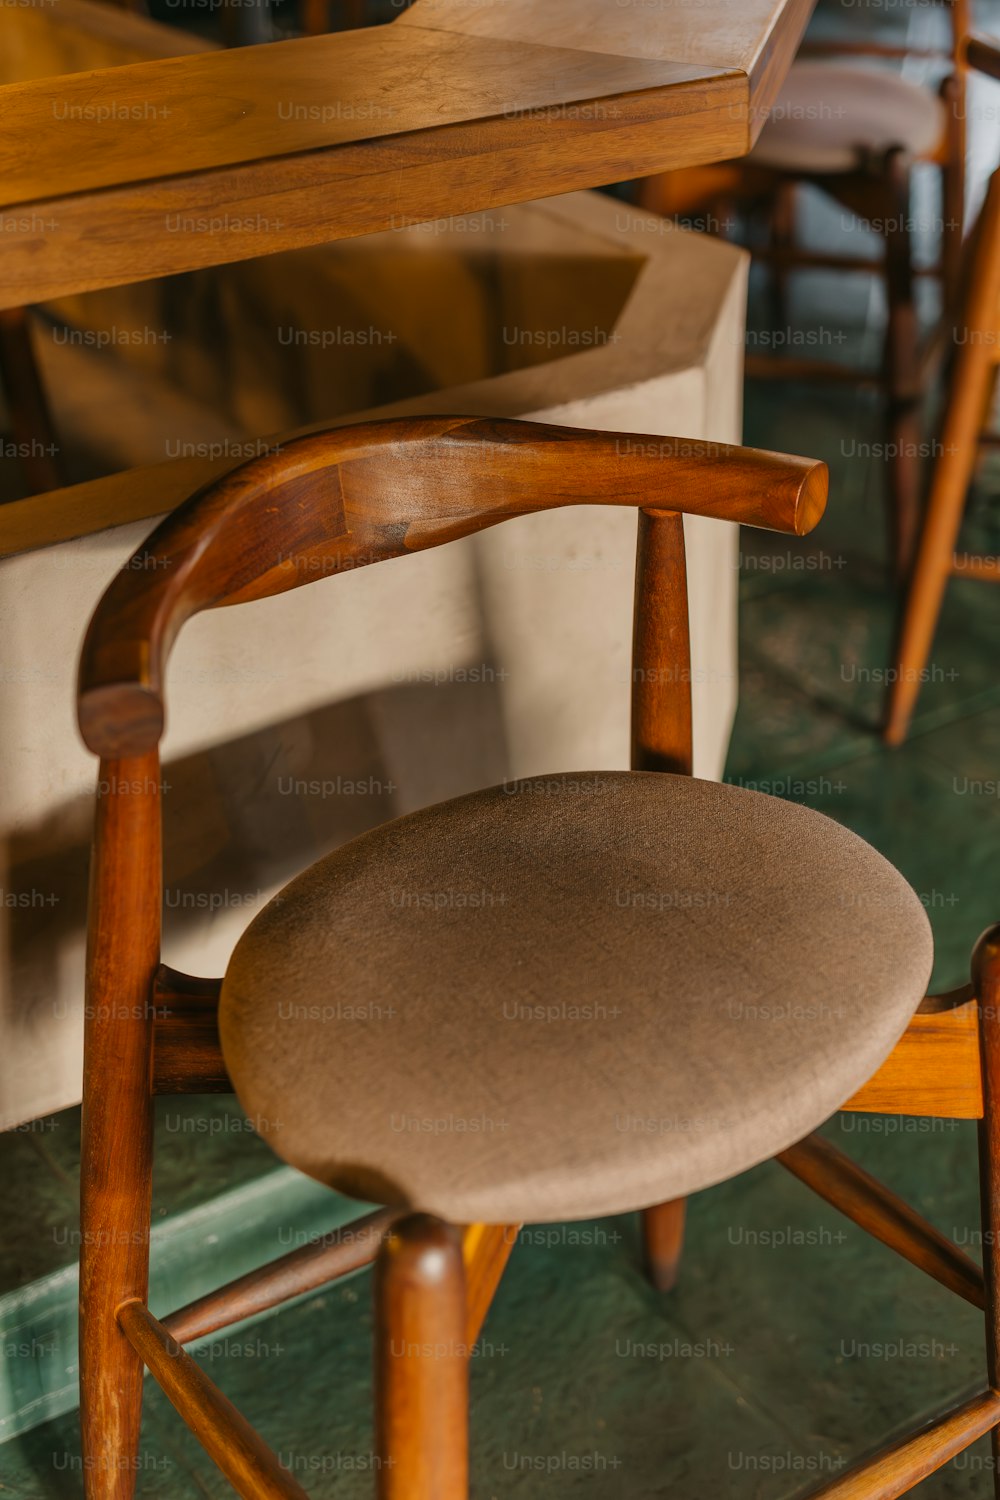 a wooden chair with a brown seat and back rest